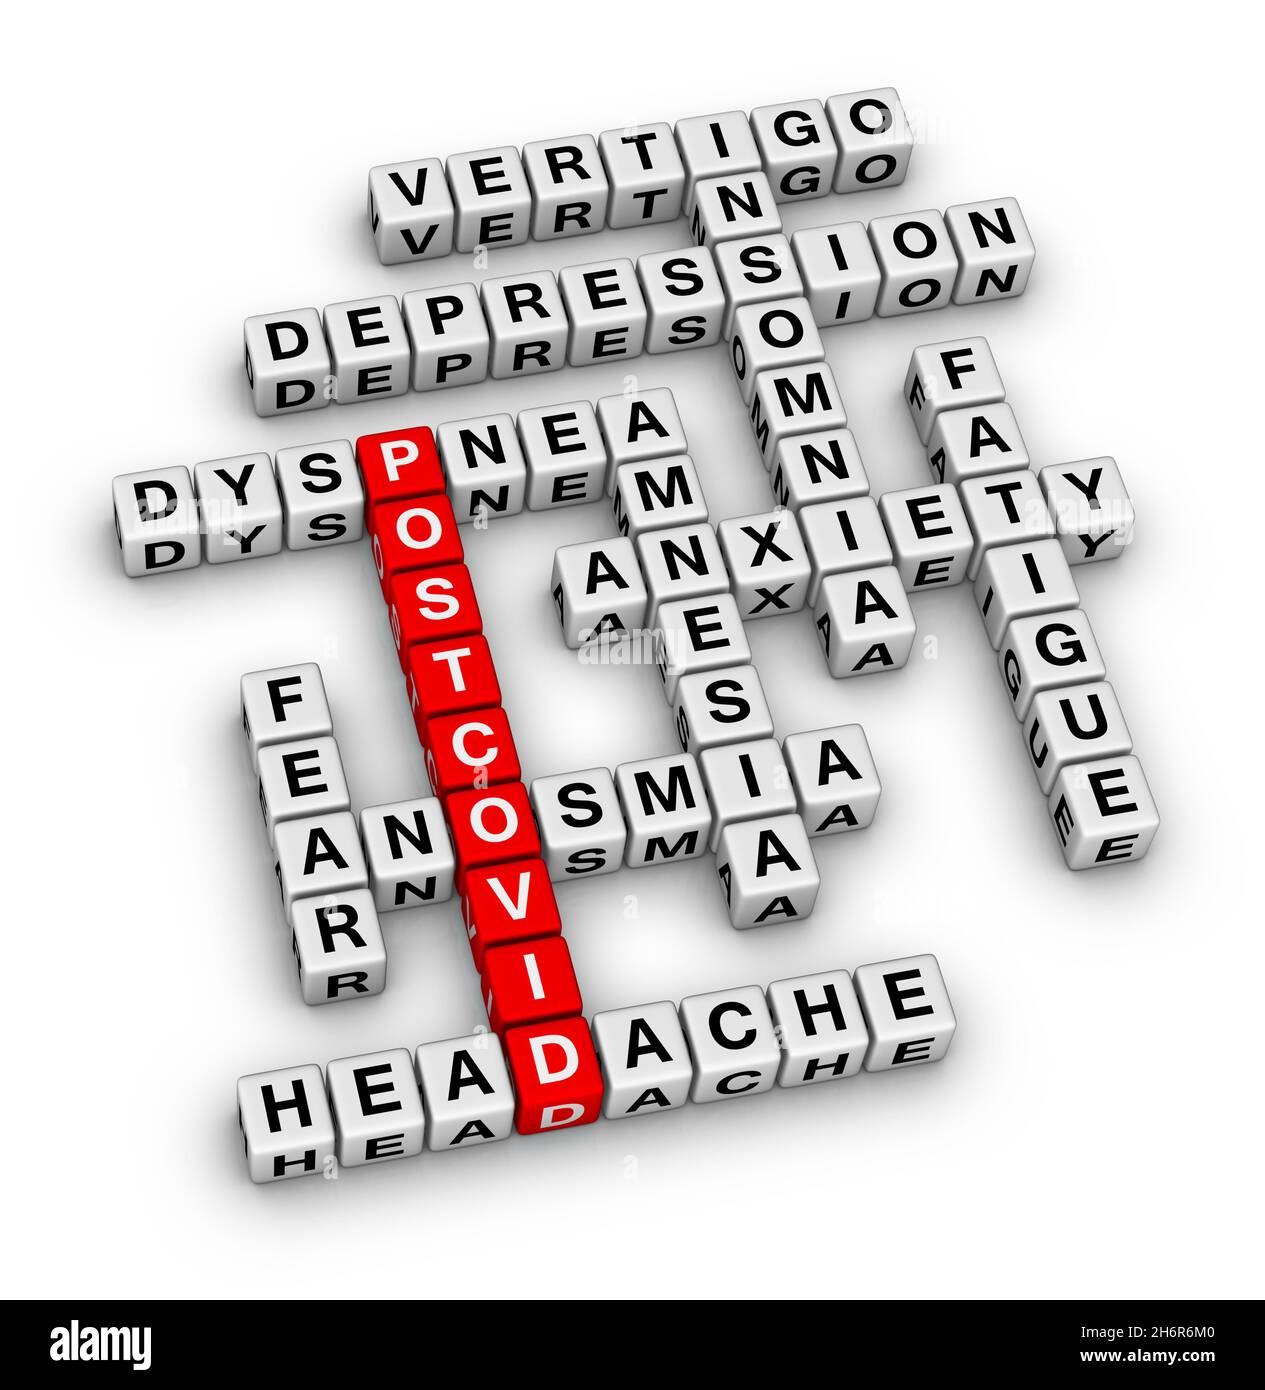 Post COVID syndrome. Mental Health problem. 3D rendering crossword puzzle. Stock Photo